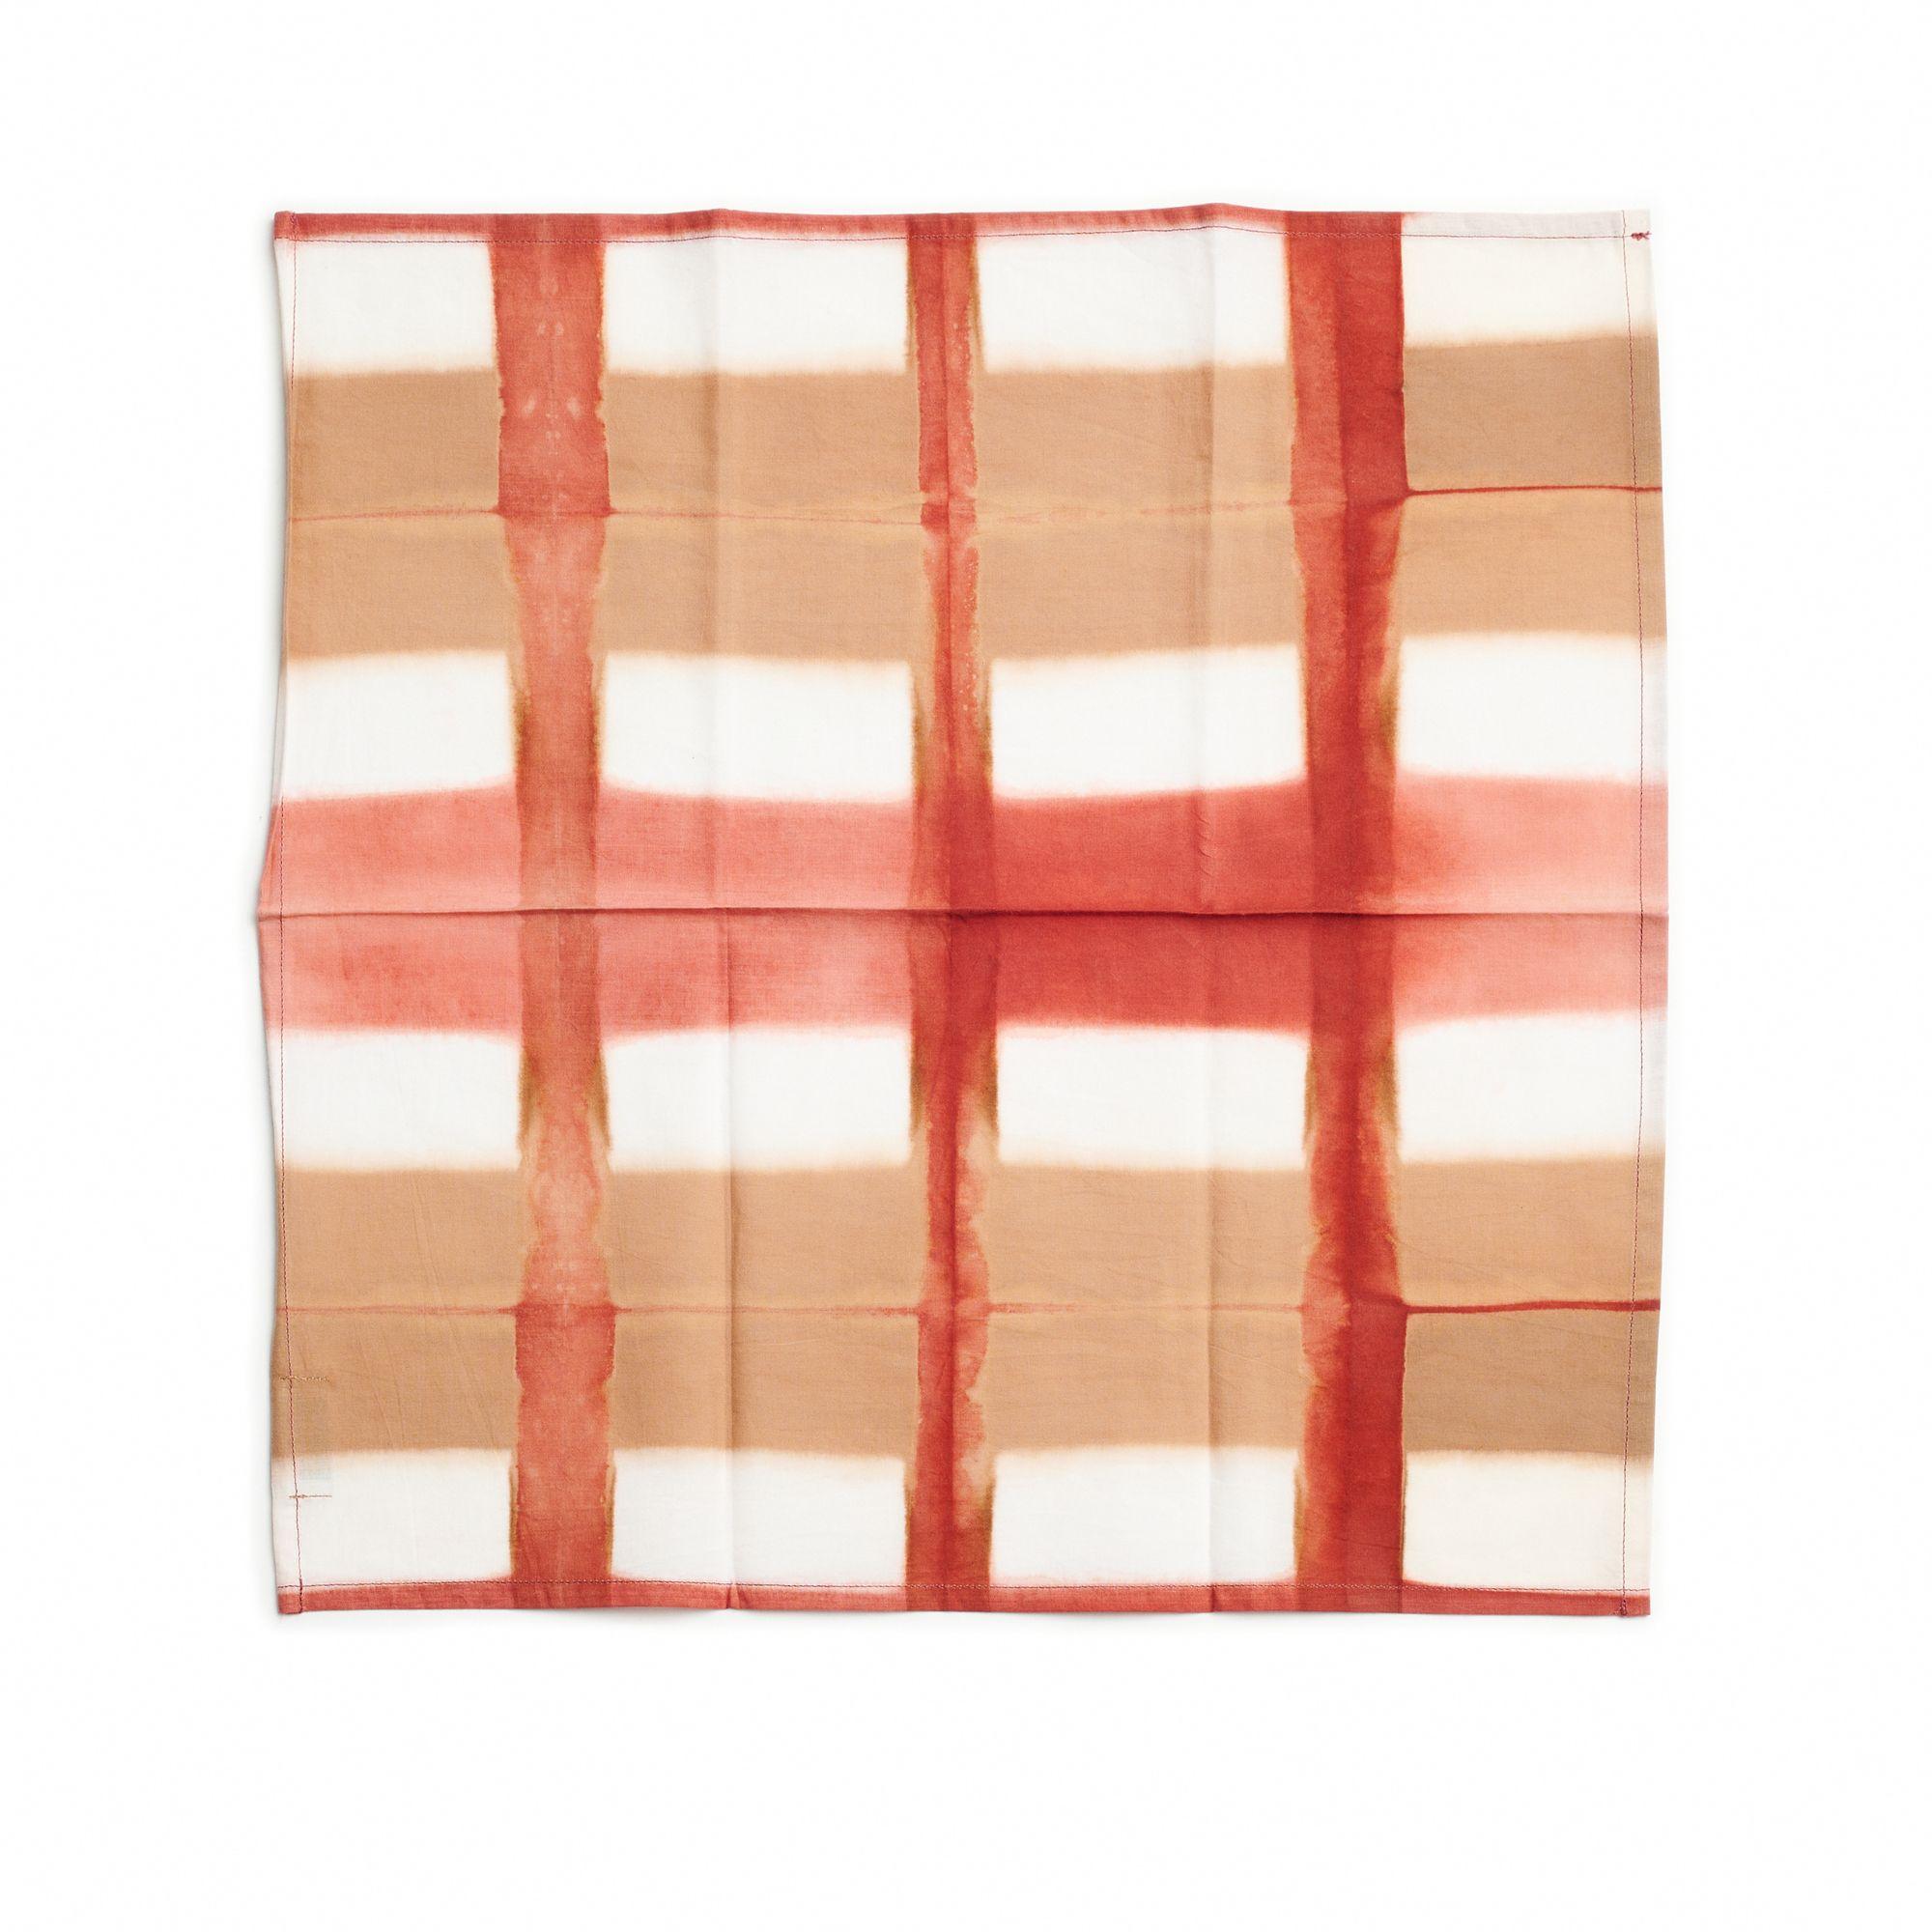 Chowk table napkin is a unique modern artisanal napkin. Created artistically and ethically by artisans in India using clamp dye technique, using only pure natural dyes. It is a pure statement piece that adds modern and timeless quality as  a table